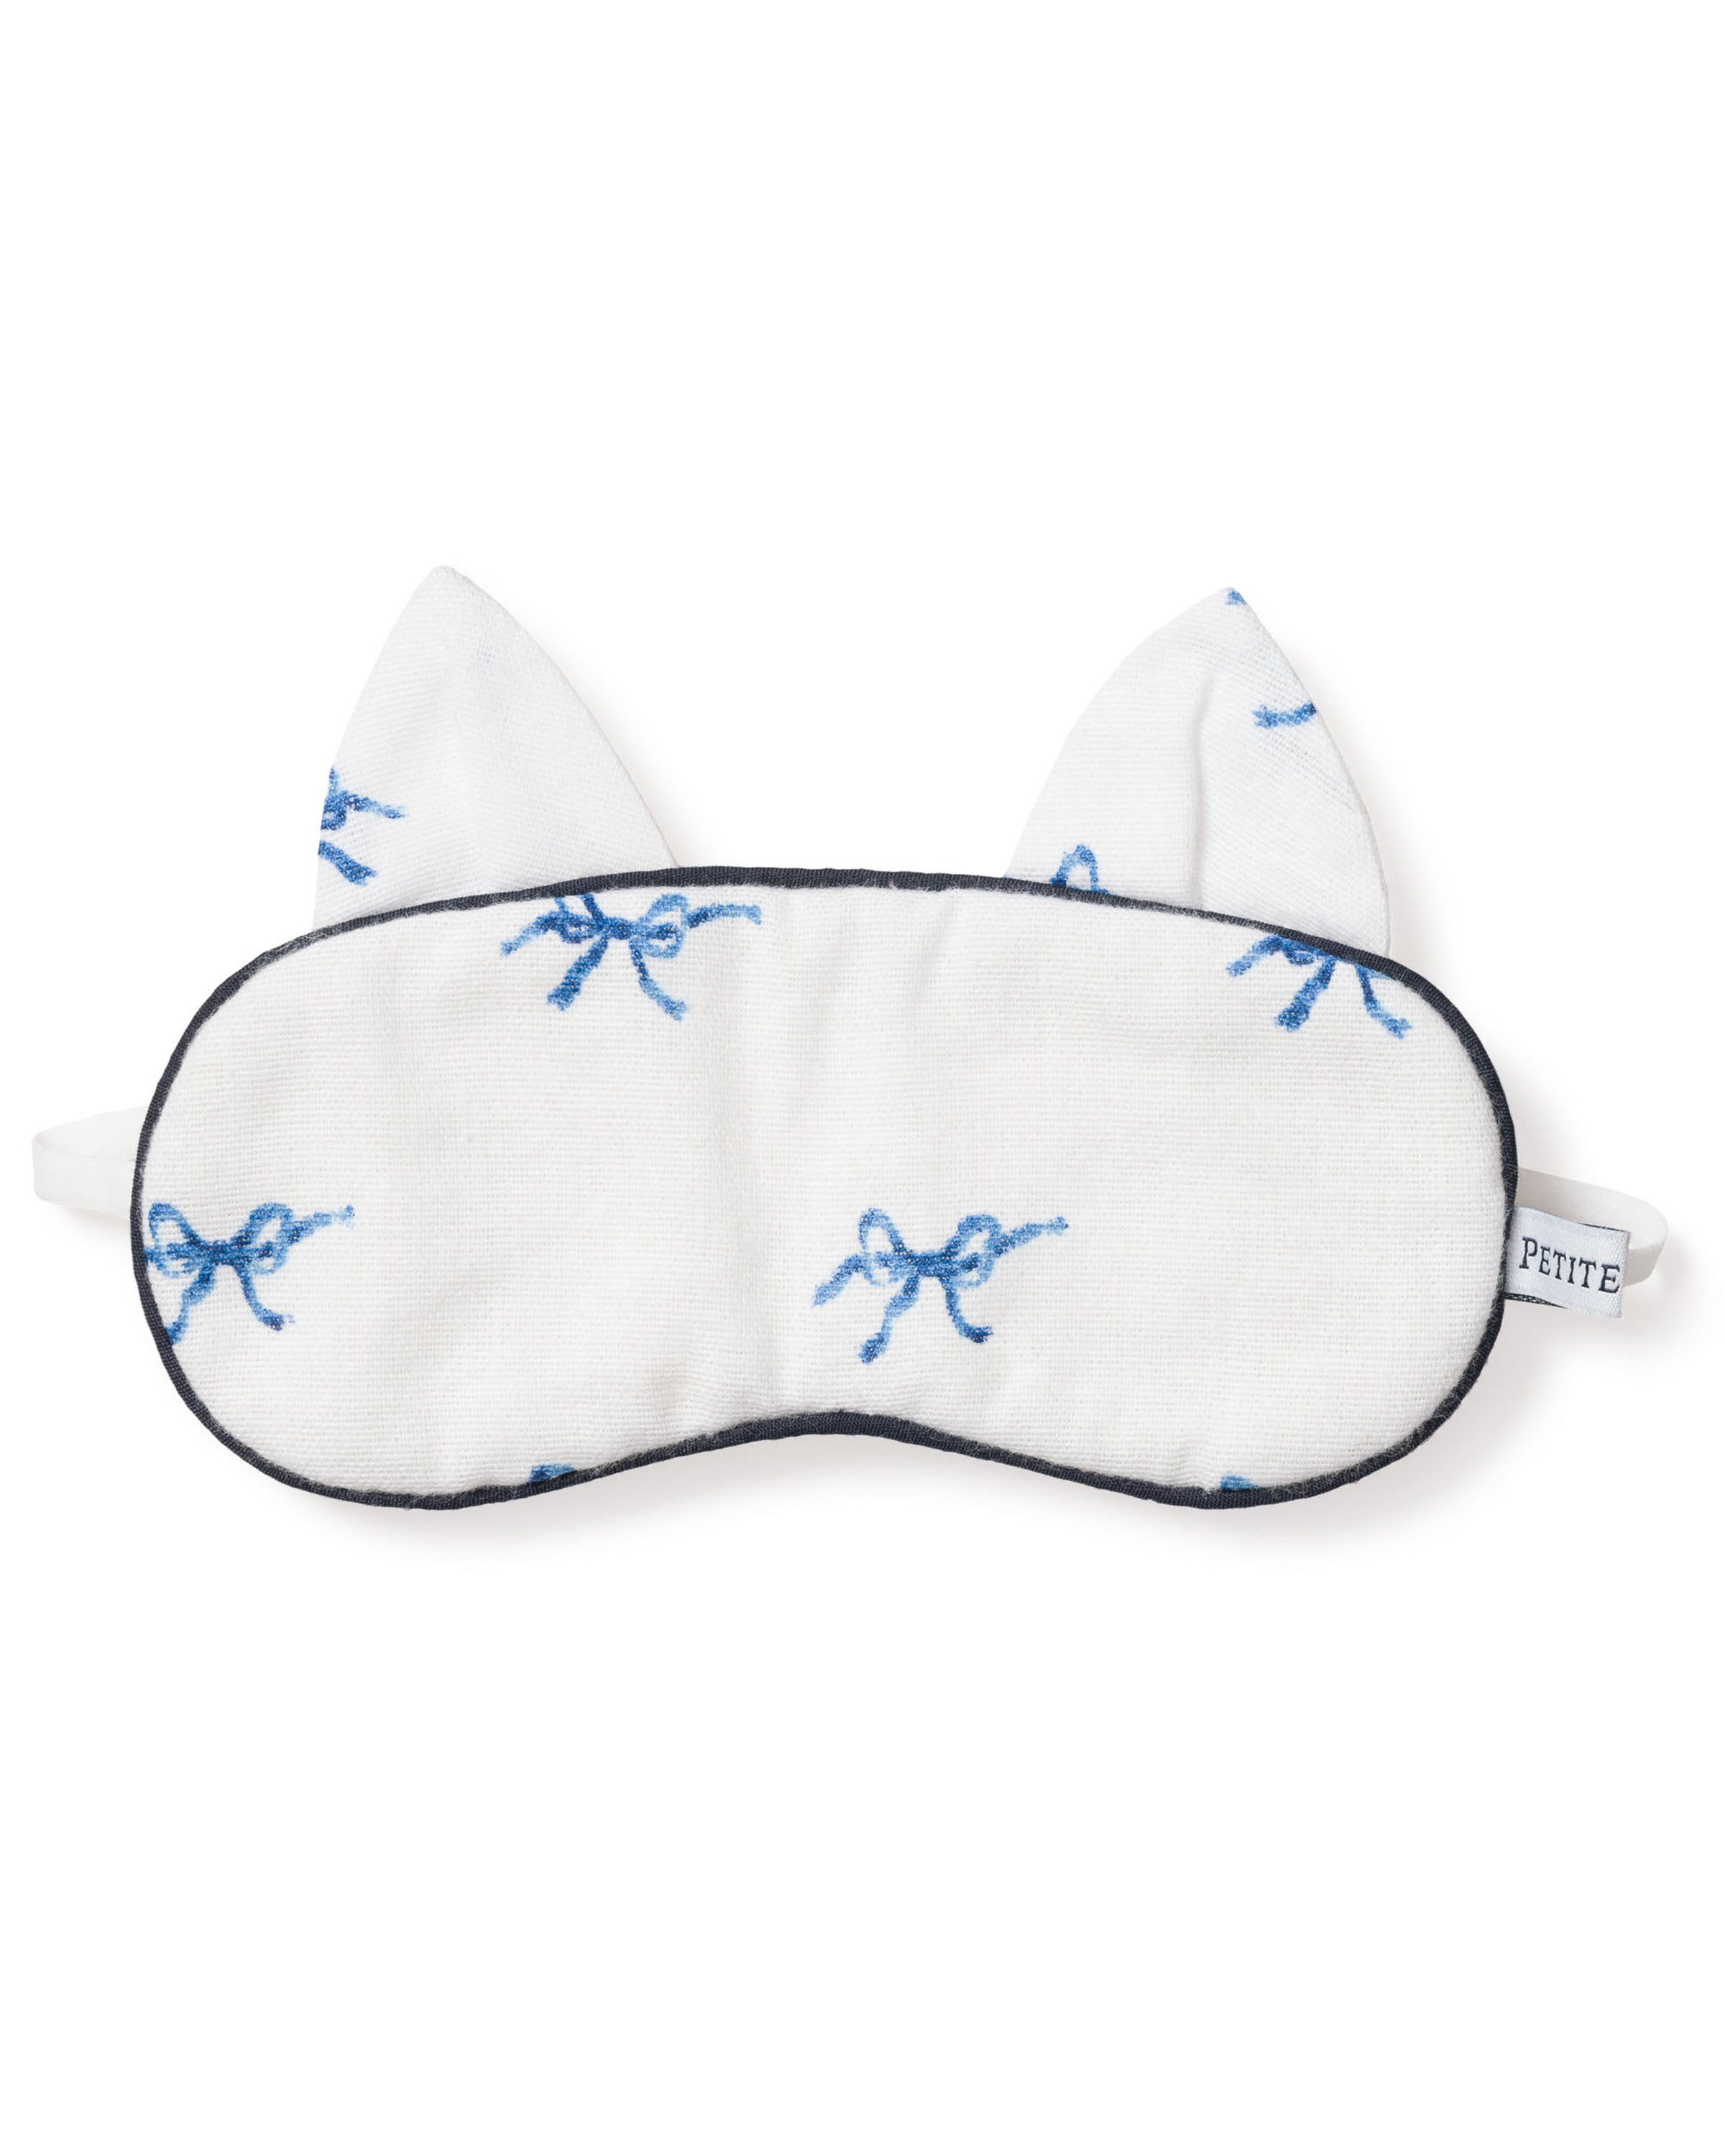 Kid's Kitty Sleep Mask in Fanciful Bows